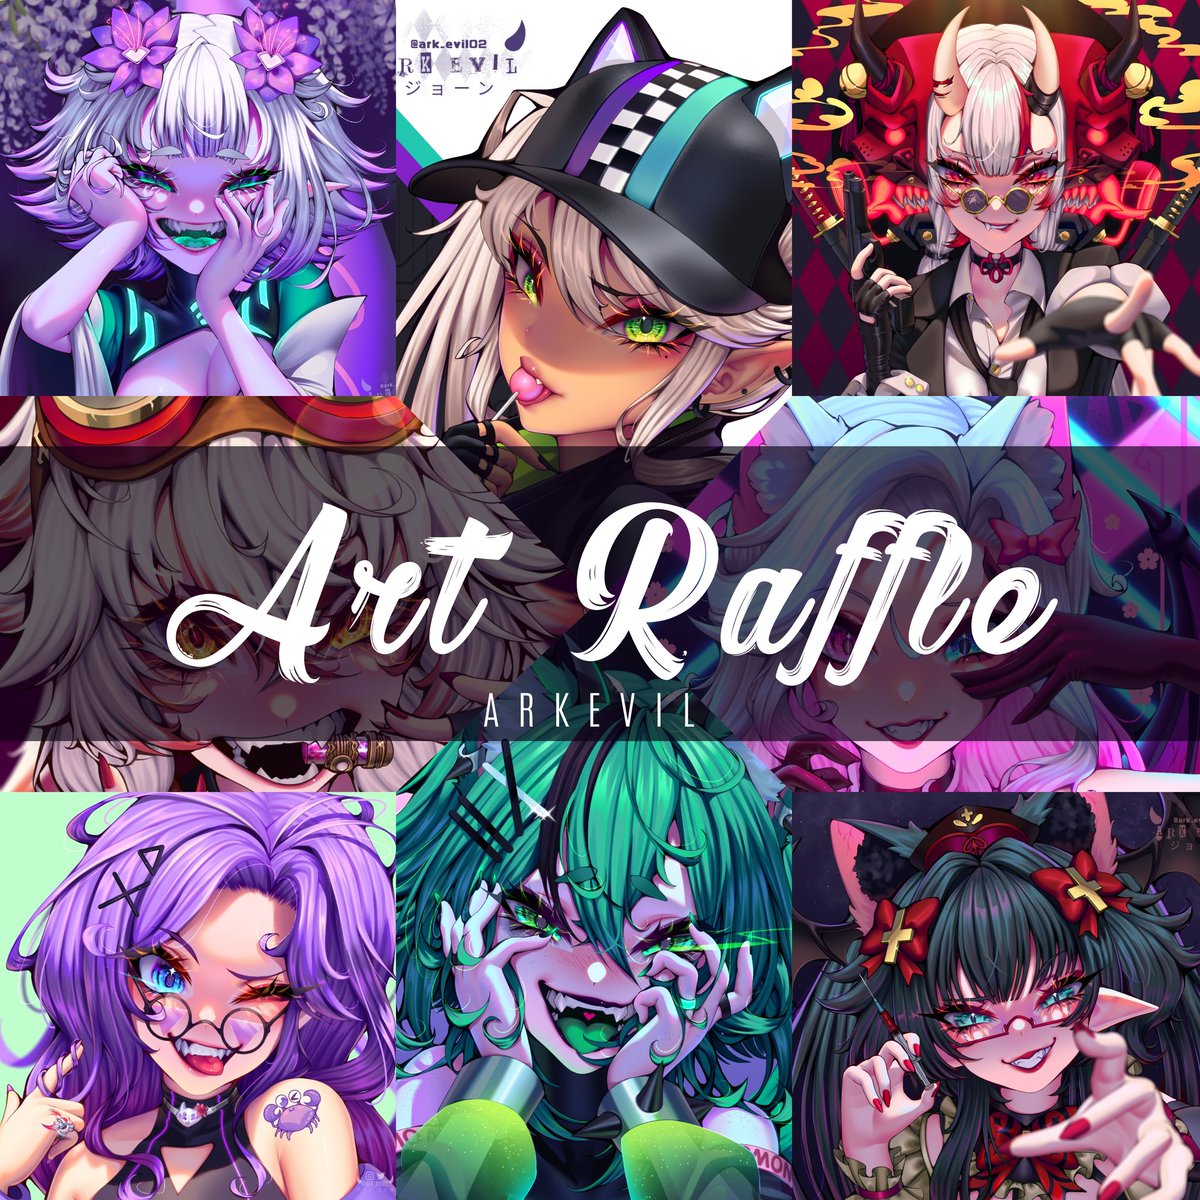 ·:*¨༺     ★      ༻¨*:·.
    38k ART RAFFLE 
··:*¨༺     ★      ༻¨*:·.
To enter:
★Like this post
★Follow
★Retweet
★Comment your reference/ png (Optional)

Ends in June 28th , 2022 
★1 winner receives a headshot Type1 illustration 
★900 RETWEETS = Another winner  unlocked